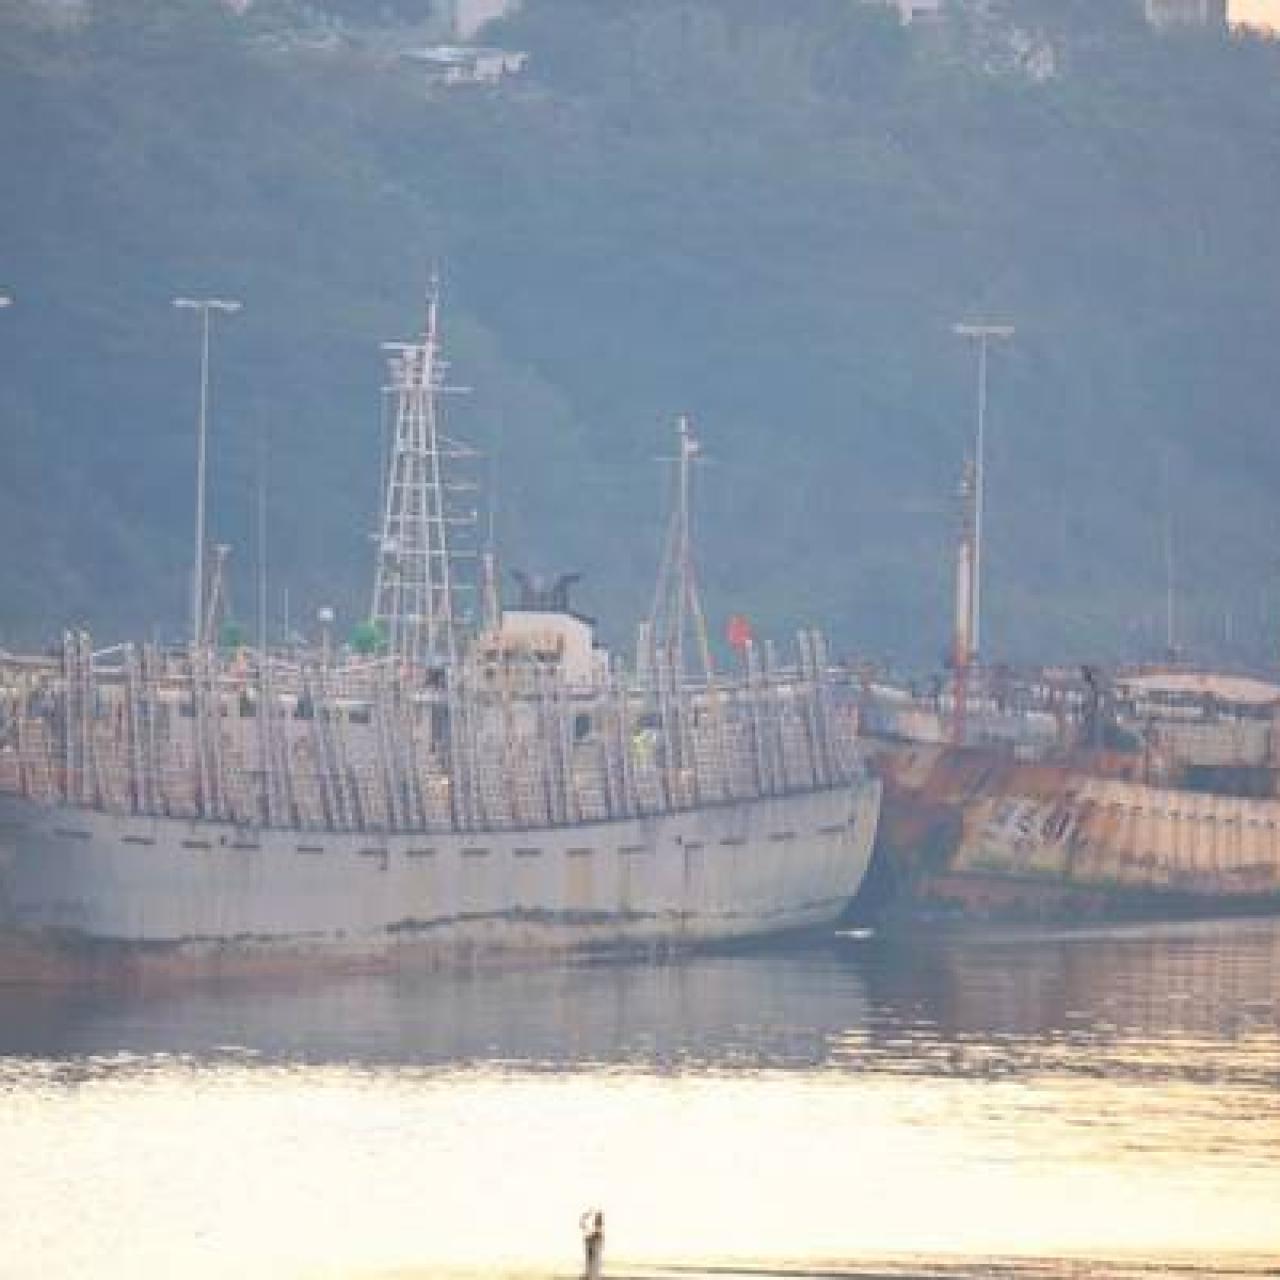 "Legal" Chinese fishing vessel with 600 tons of squid that ran away from our coastguard